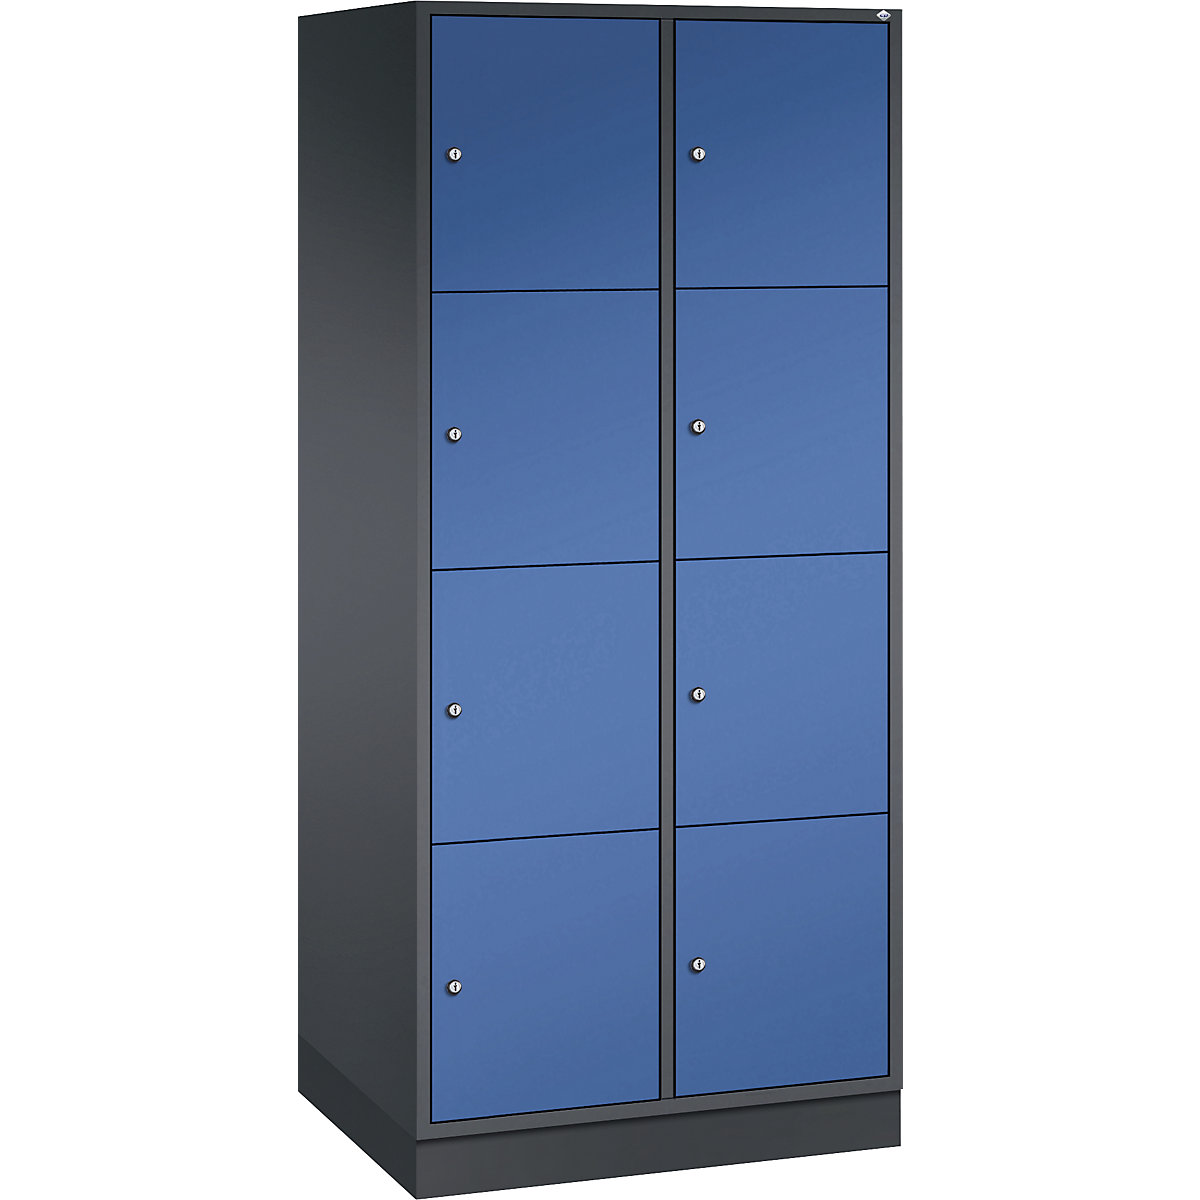 INTRO steel compartment locker, compartment height 435 mm – C+P, WxD 820 x 600 mm, 8 compartments, black grey body, gentian blue doors